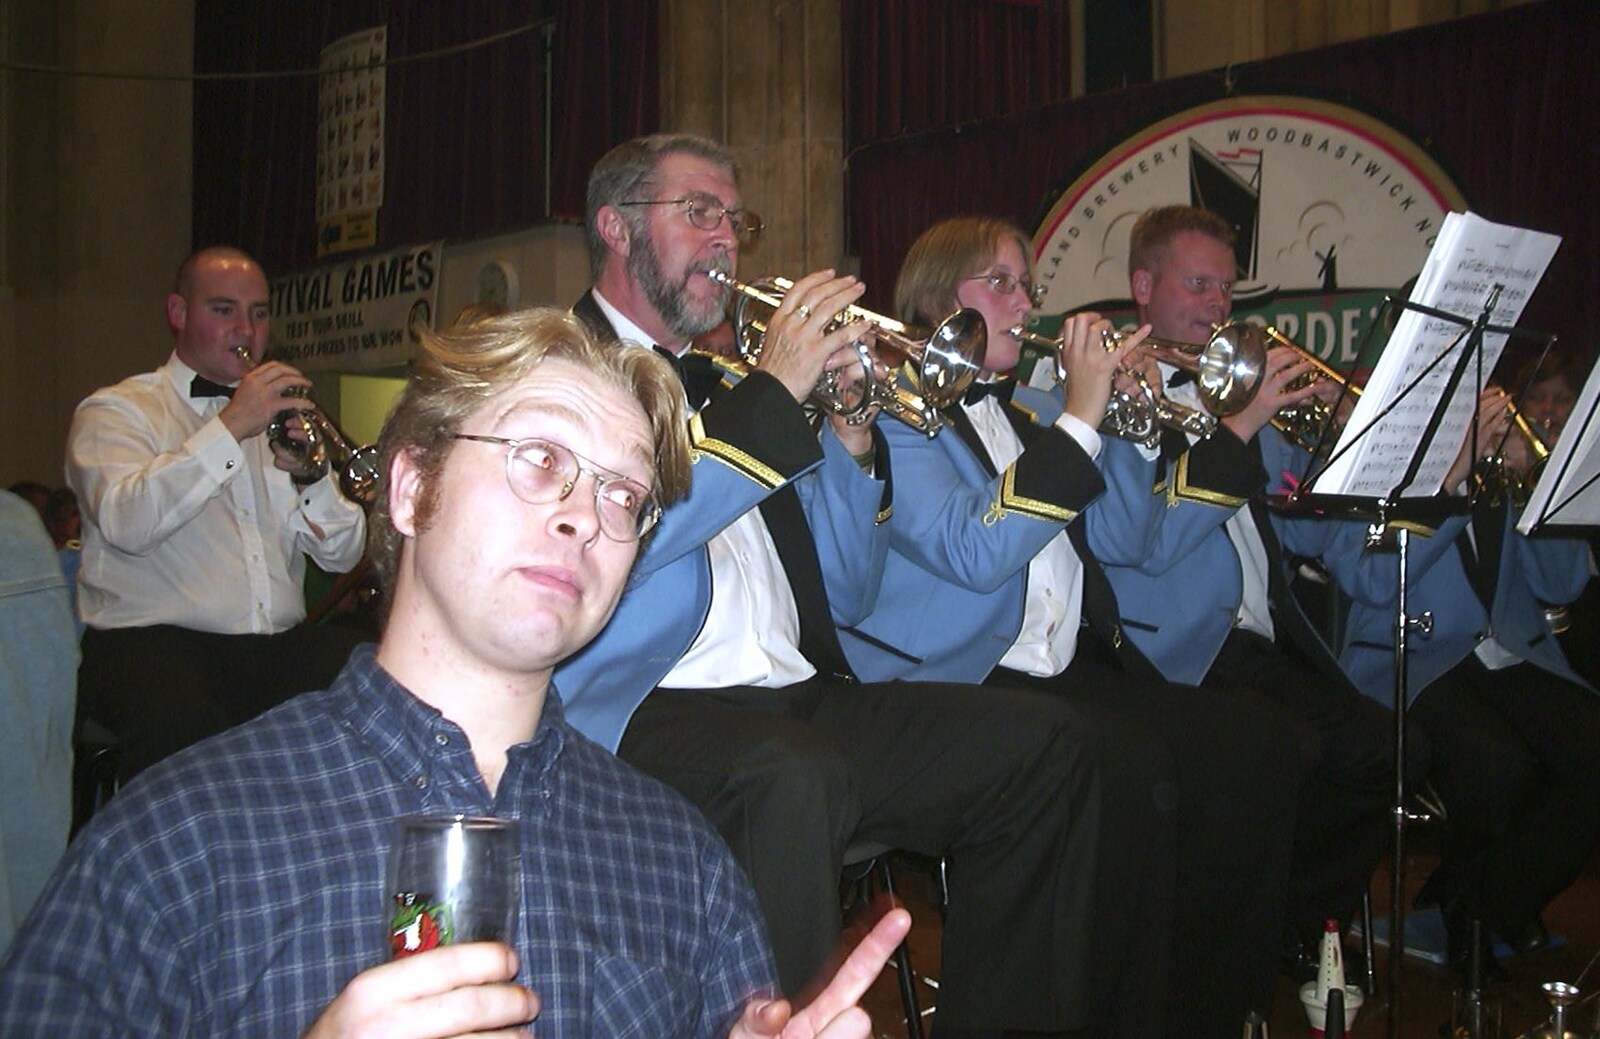 Marc points at the band from The Brome Swan at the Norwich Beer Festival, St. Andrew's Hall, Norwich - 29th October 2003